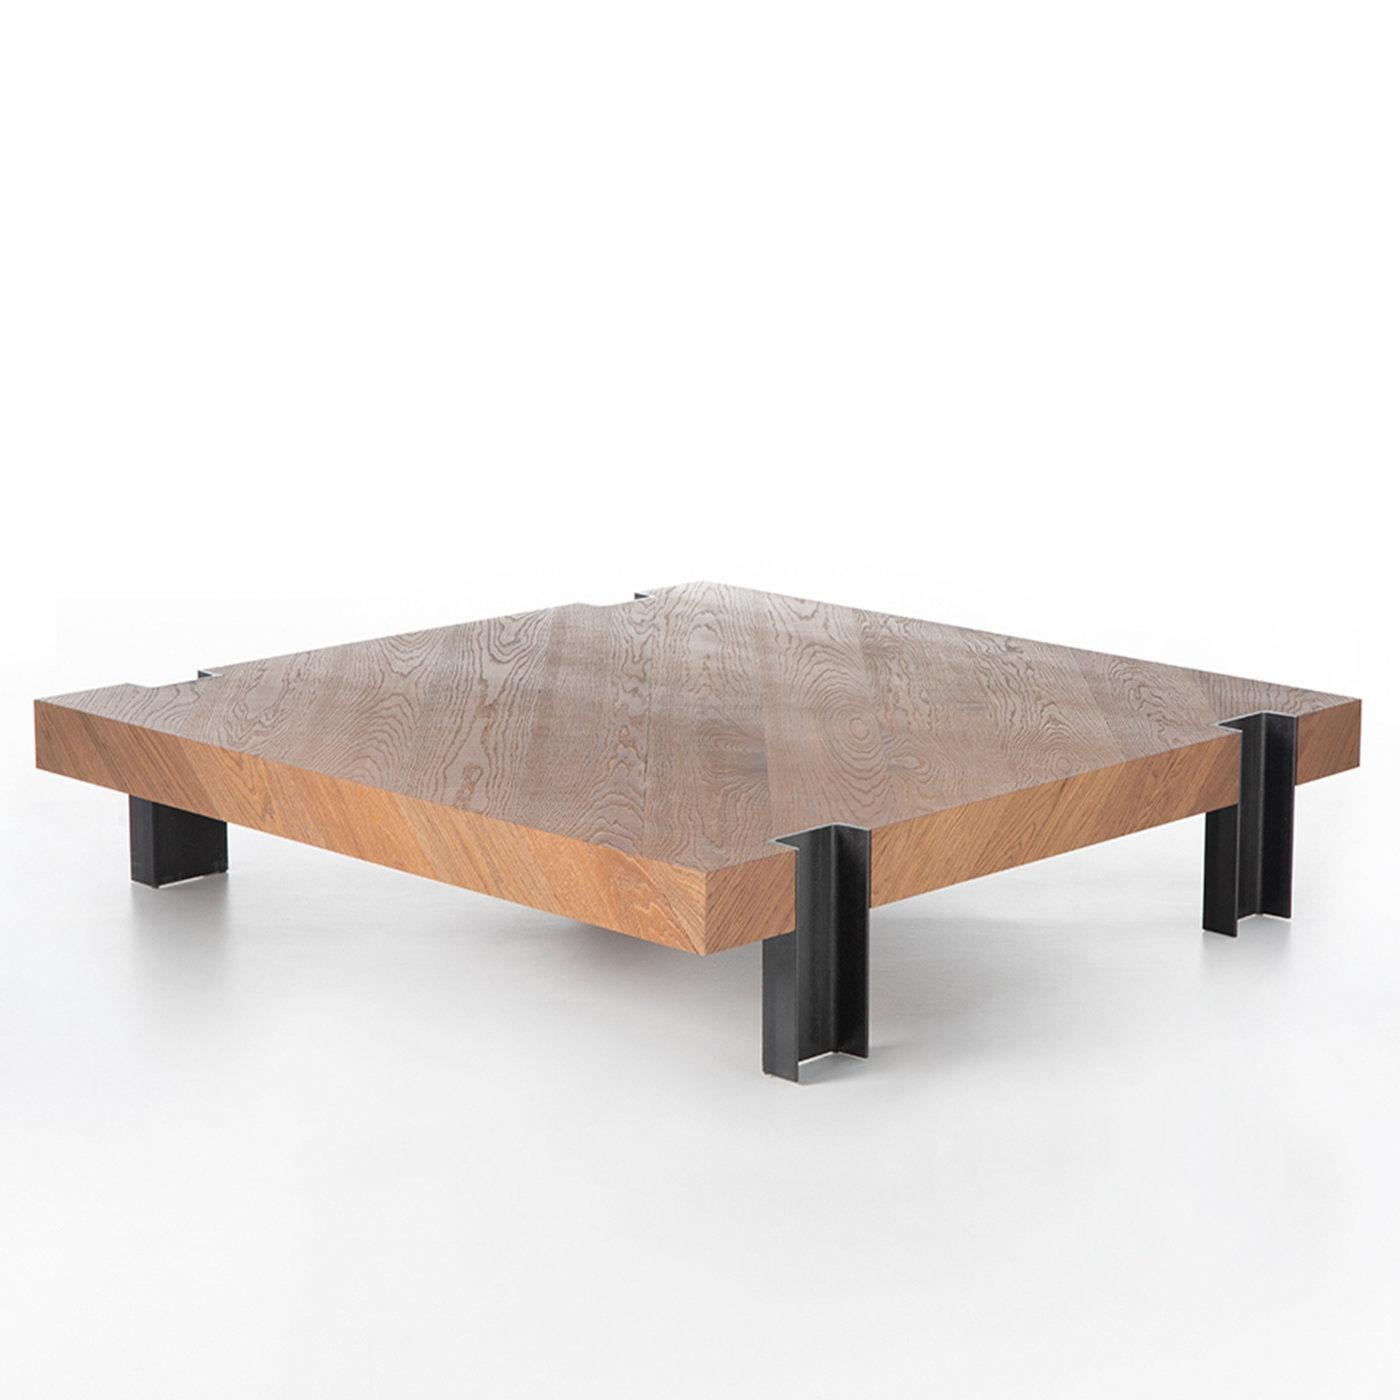 The impactful note distinguishing this extra-low coffee table lies in its solemn aesthetic, where the metal legs appear recessed into the square, ultra-thick wooden top without joints. Deceptively rigorous at first sight, the design channels a